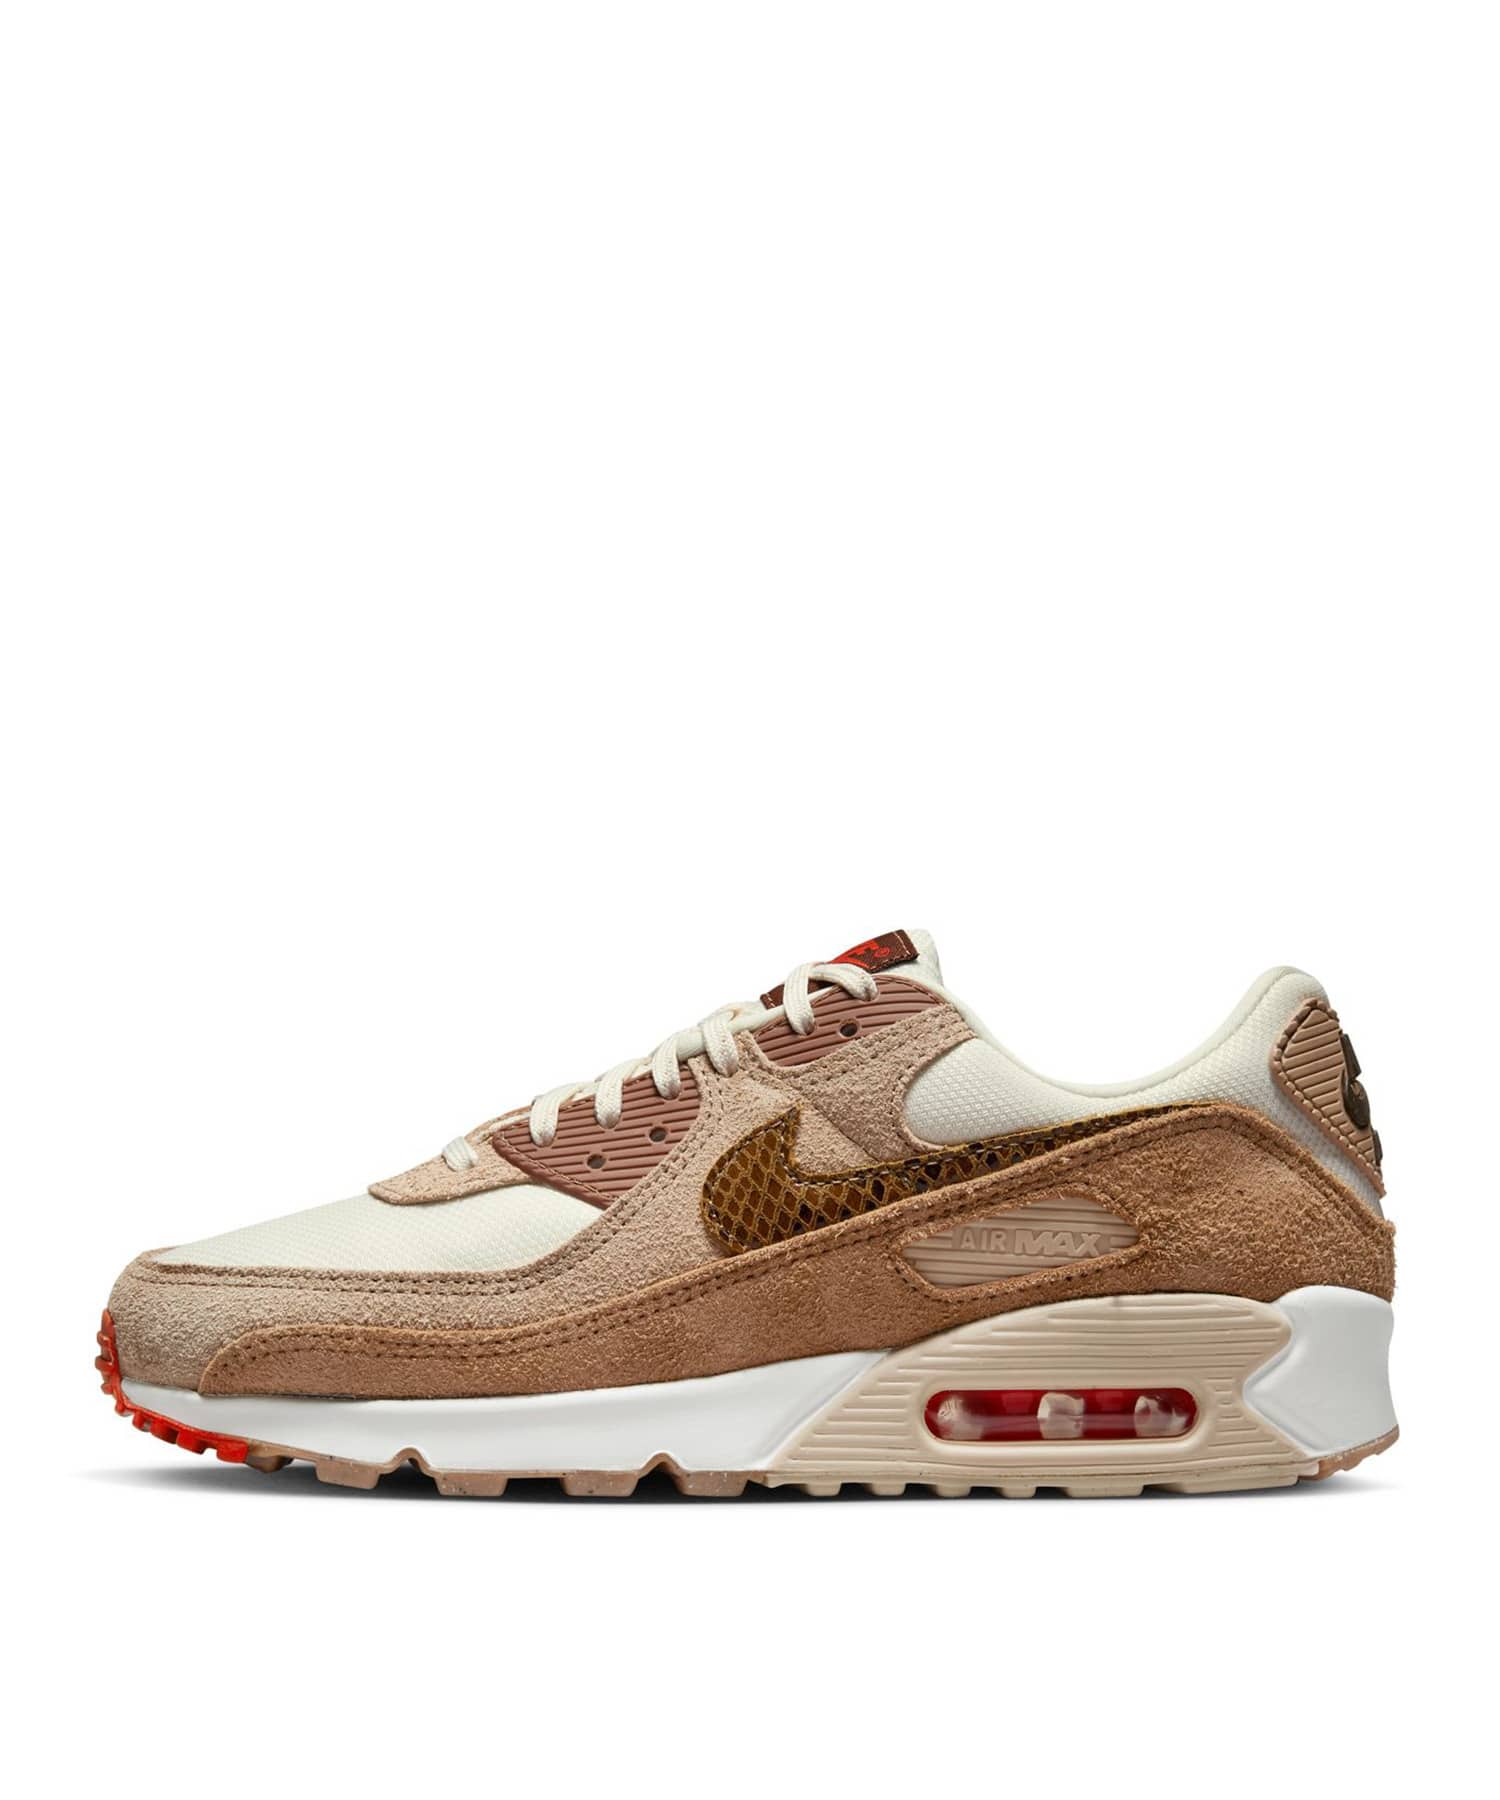 AIR MAX 90 SE｜ESTNATION ONLINE STORE｜エストネーション 公式通販